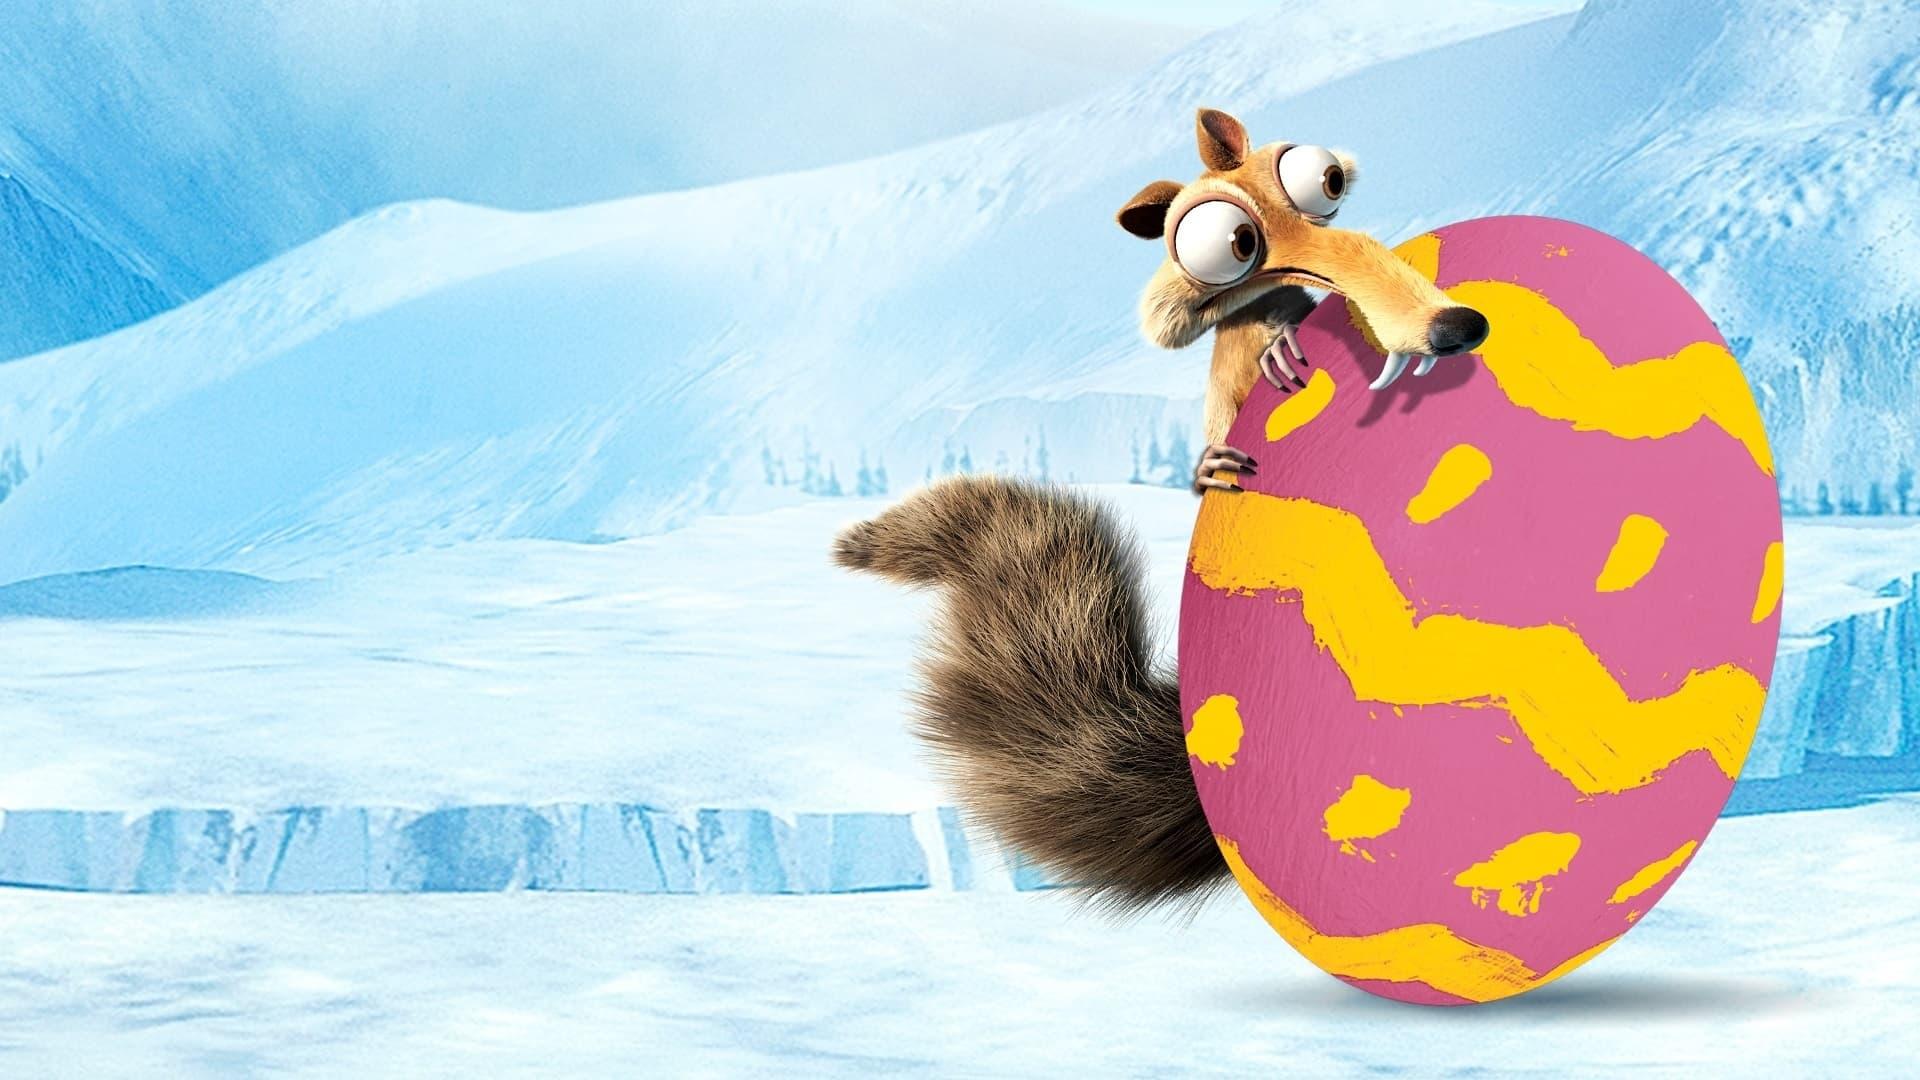 Ice Age: The Great Egg-Scapade backdrop